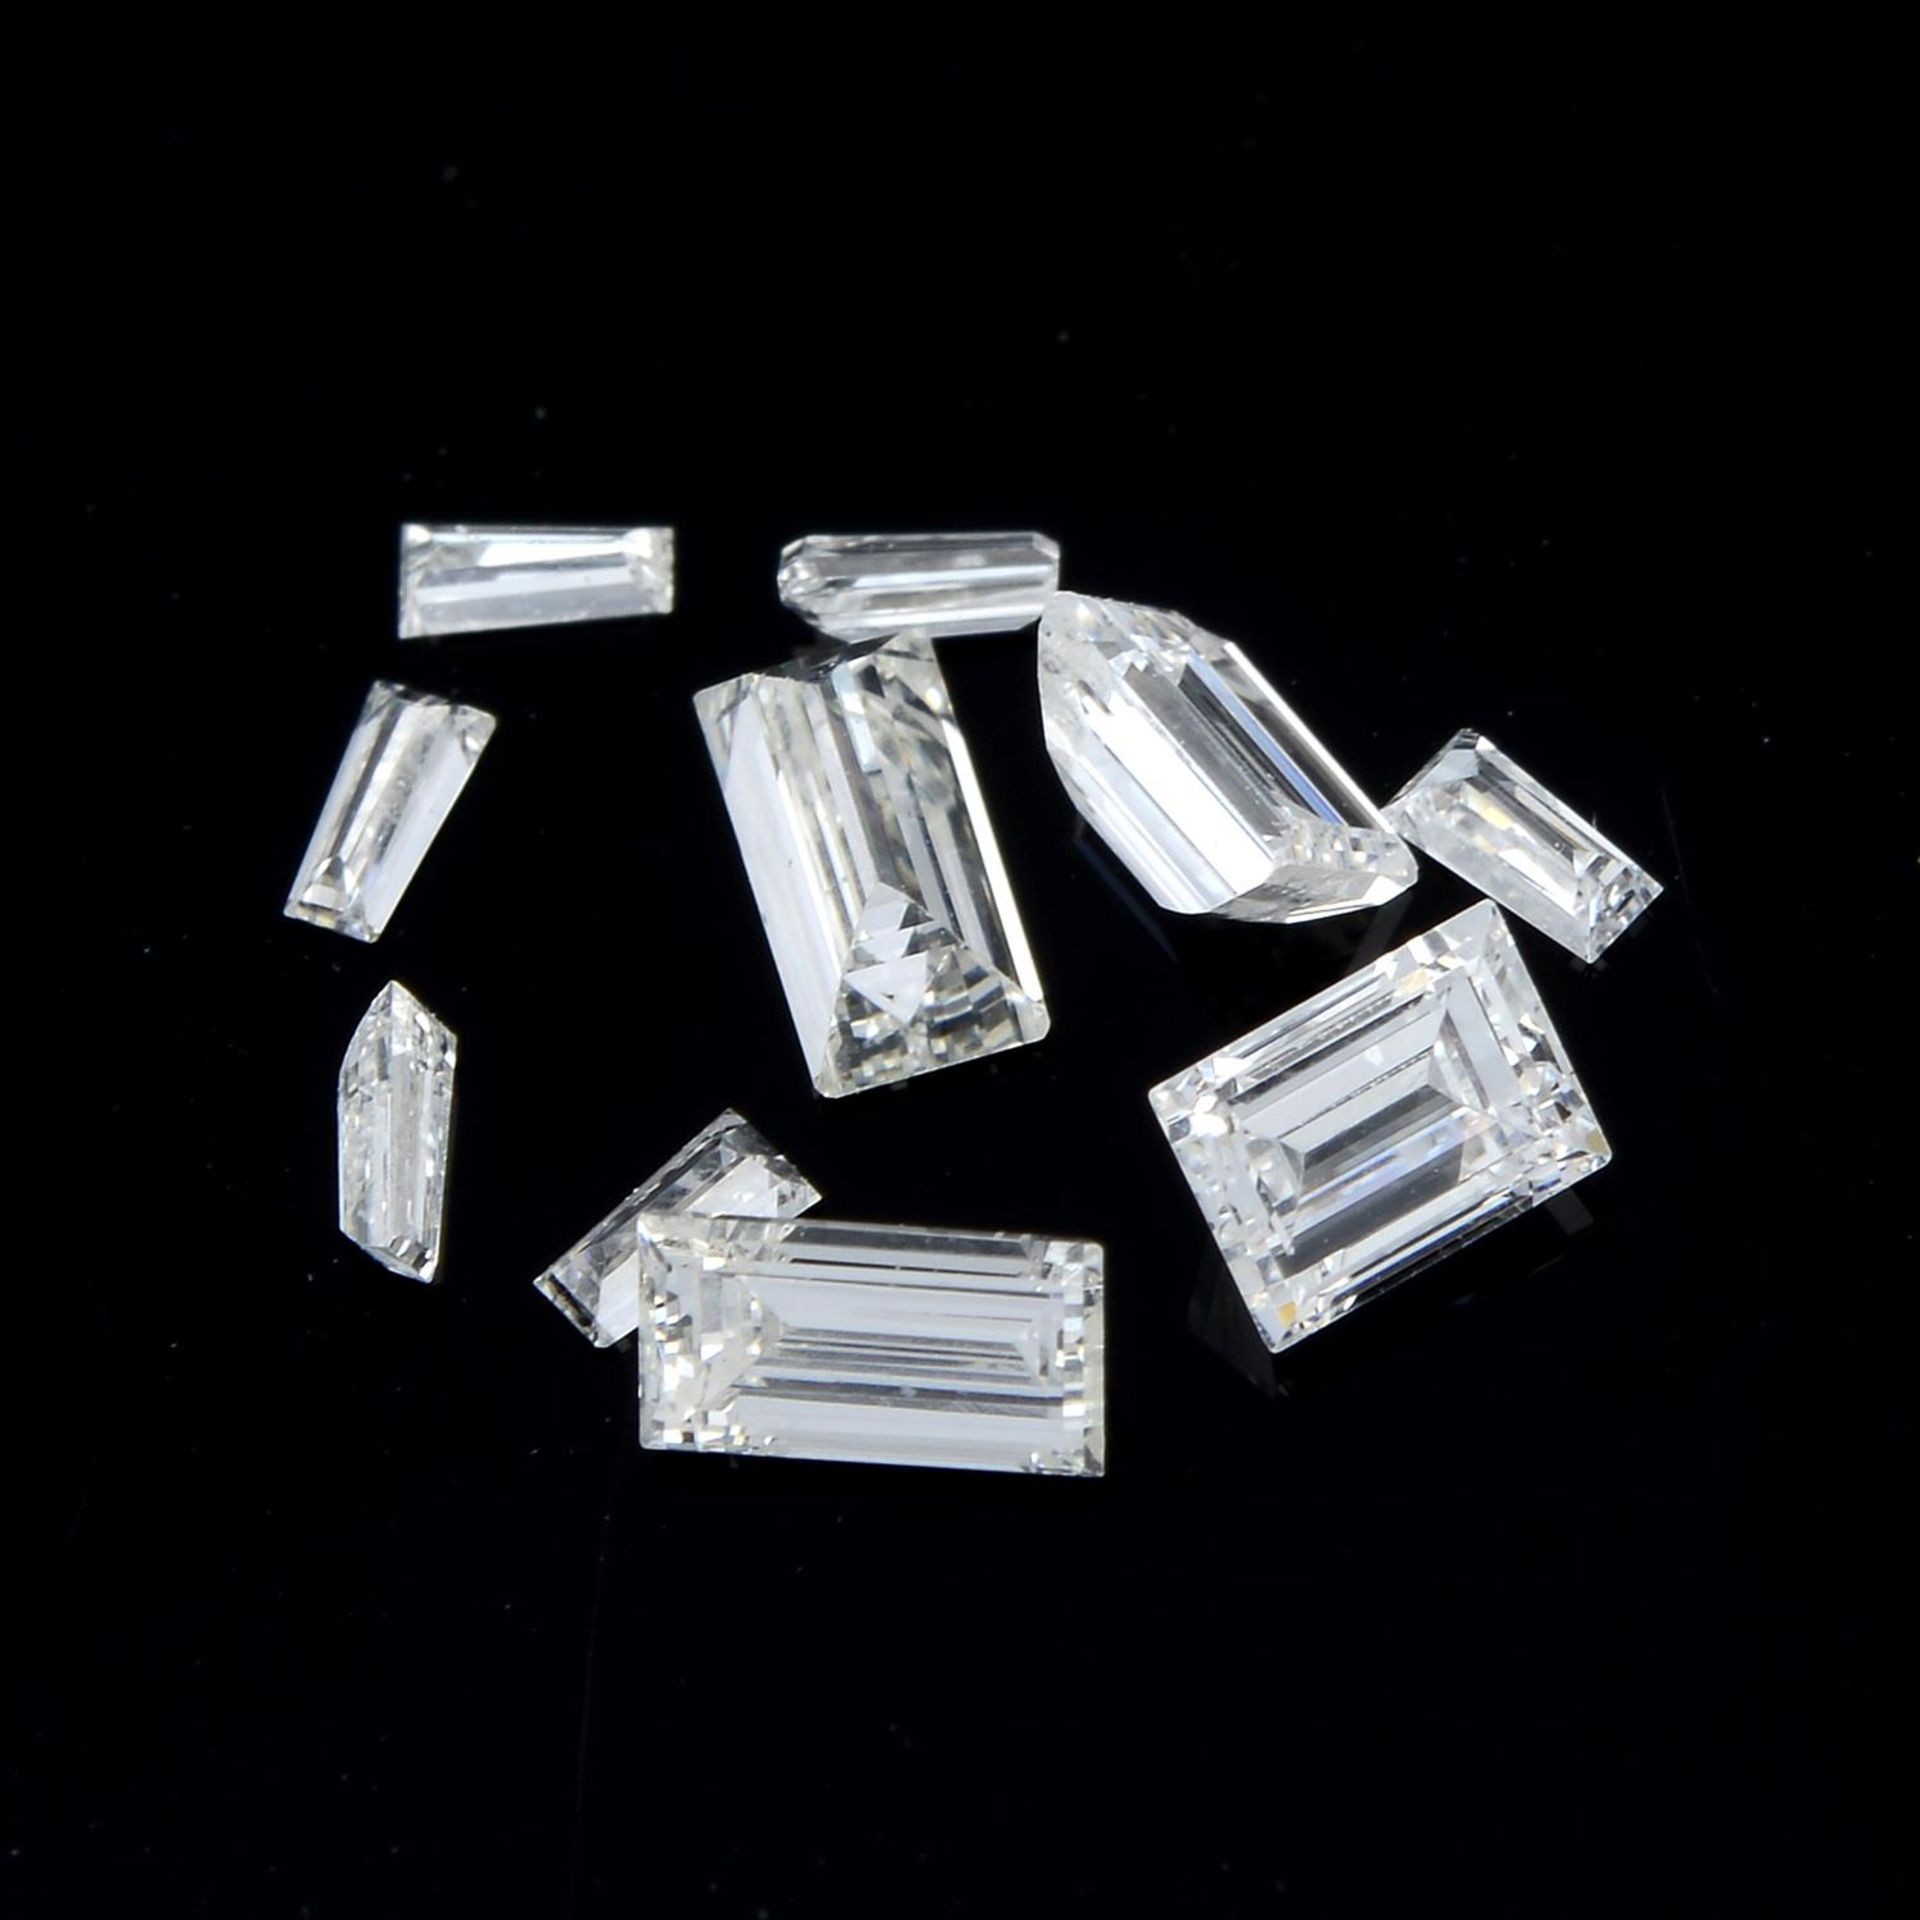 A selection of rectangular-cut diamonds, approximate total weight 0.69ct.